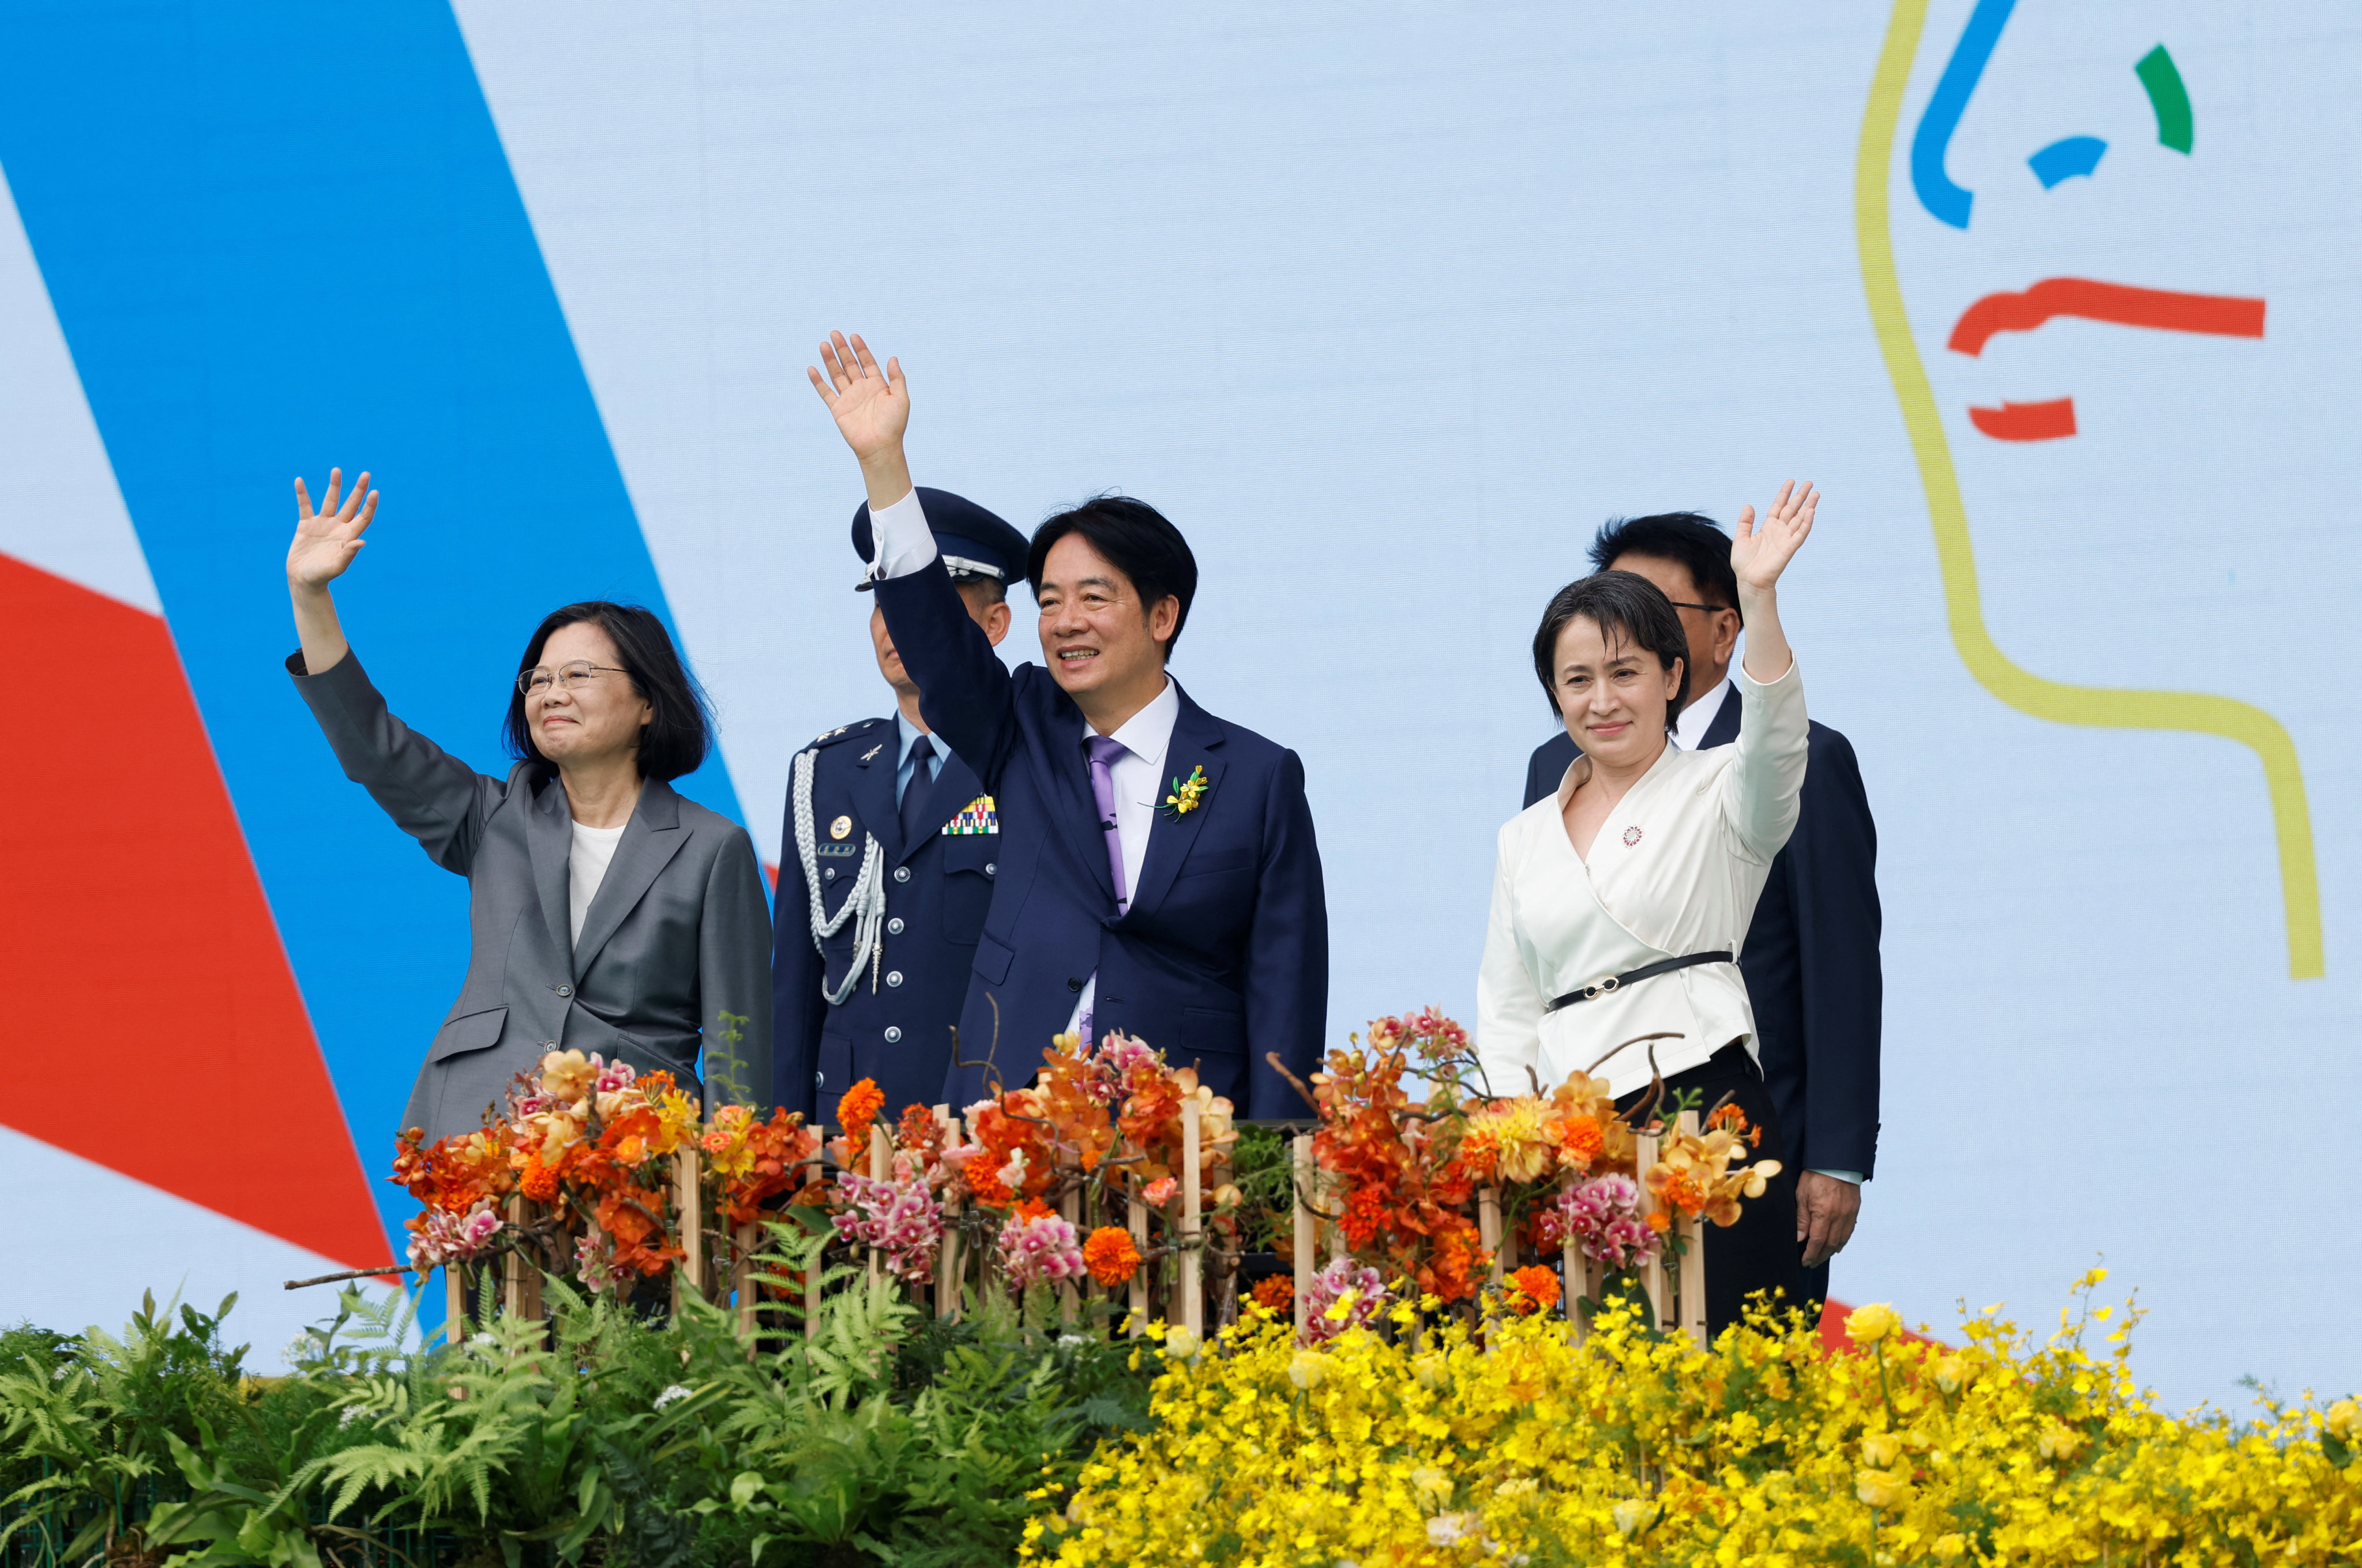 From left: former Taiwanese president Tsai Ing-wen with the island’s new leader William Lai Ching-te and his vice-president Hsiao Bi-khim wave during the inauguration ceremony on Monday. Photo: Reuters